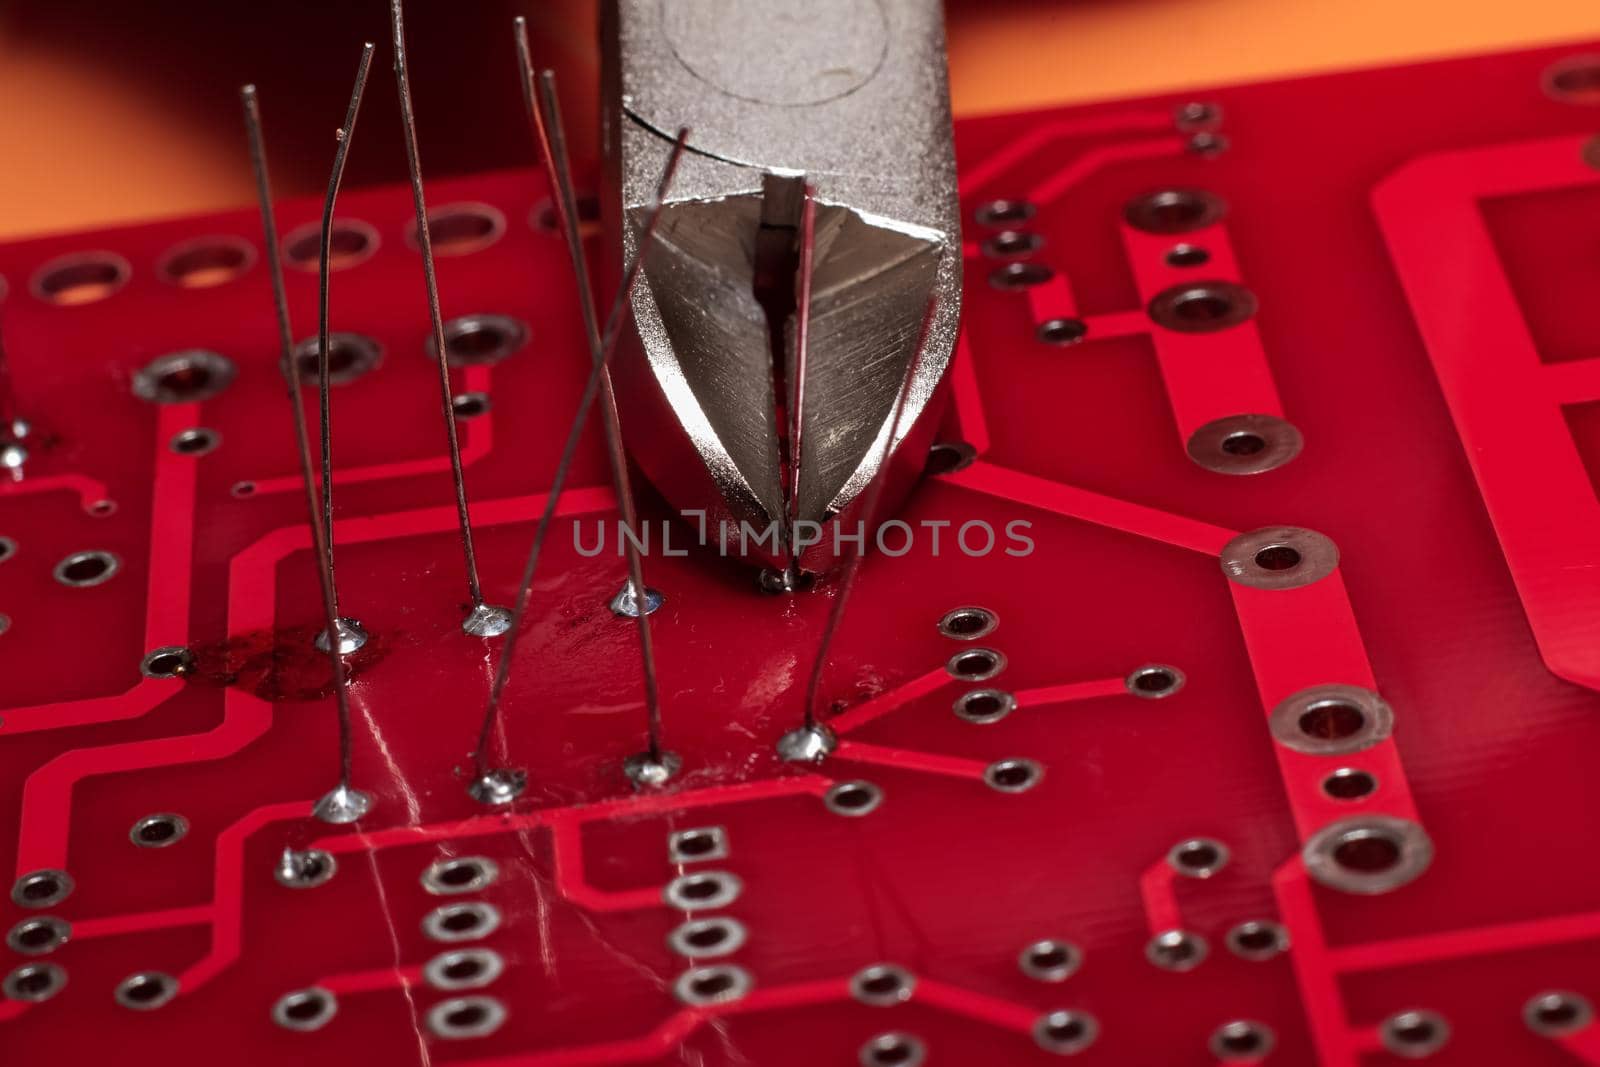 Red printed circuit board with wires and wire cutters close up